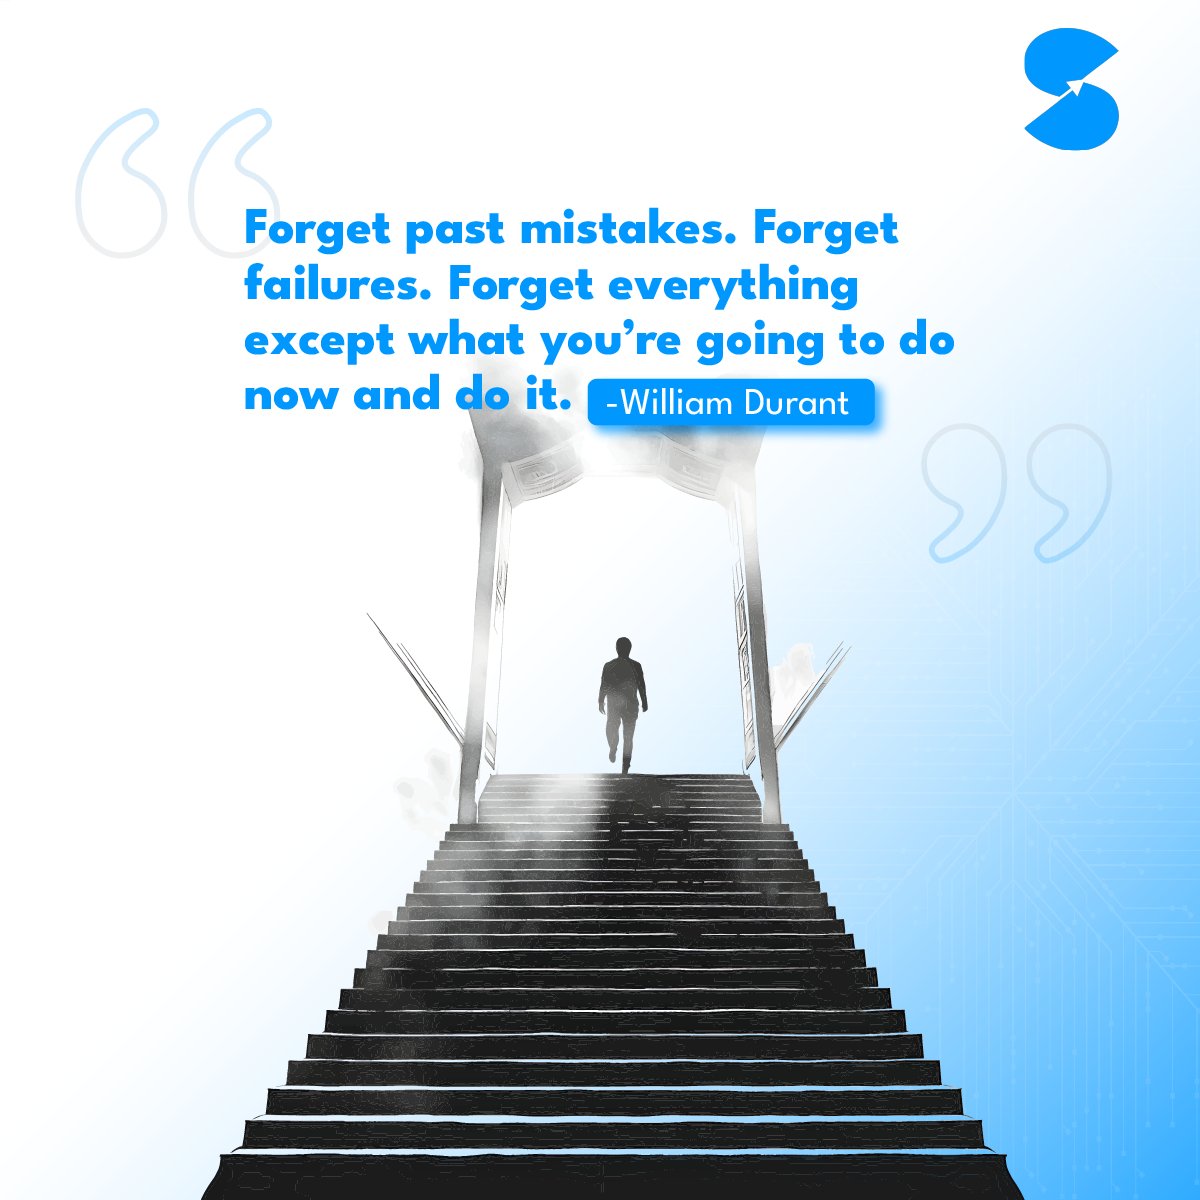 🌟 Embrace the Present and Design Your Future! 

Mistakes? ✅ Forget them. 
Failures? ✅ Forget them. 
Regrets? ✅ Forget them all!

🚀 The only thing that truly matters is what you will do NOW. 🚀

#MondayMotivation  #MondayMood  #Mondayvibes  #fleetmanagers